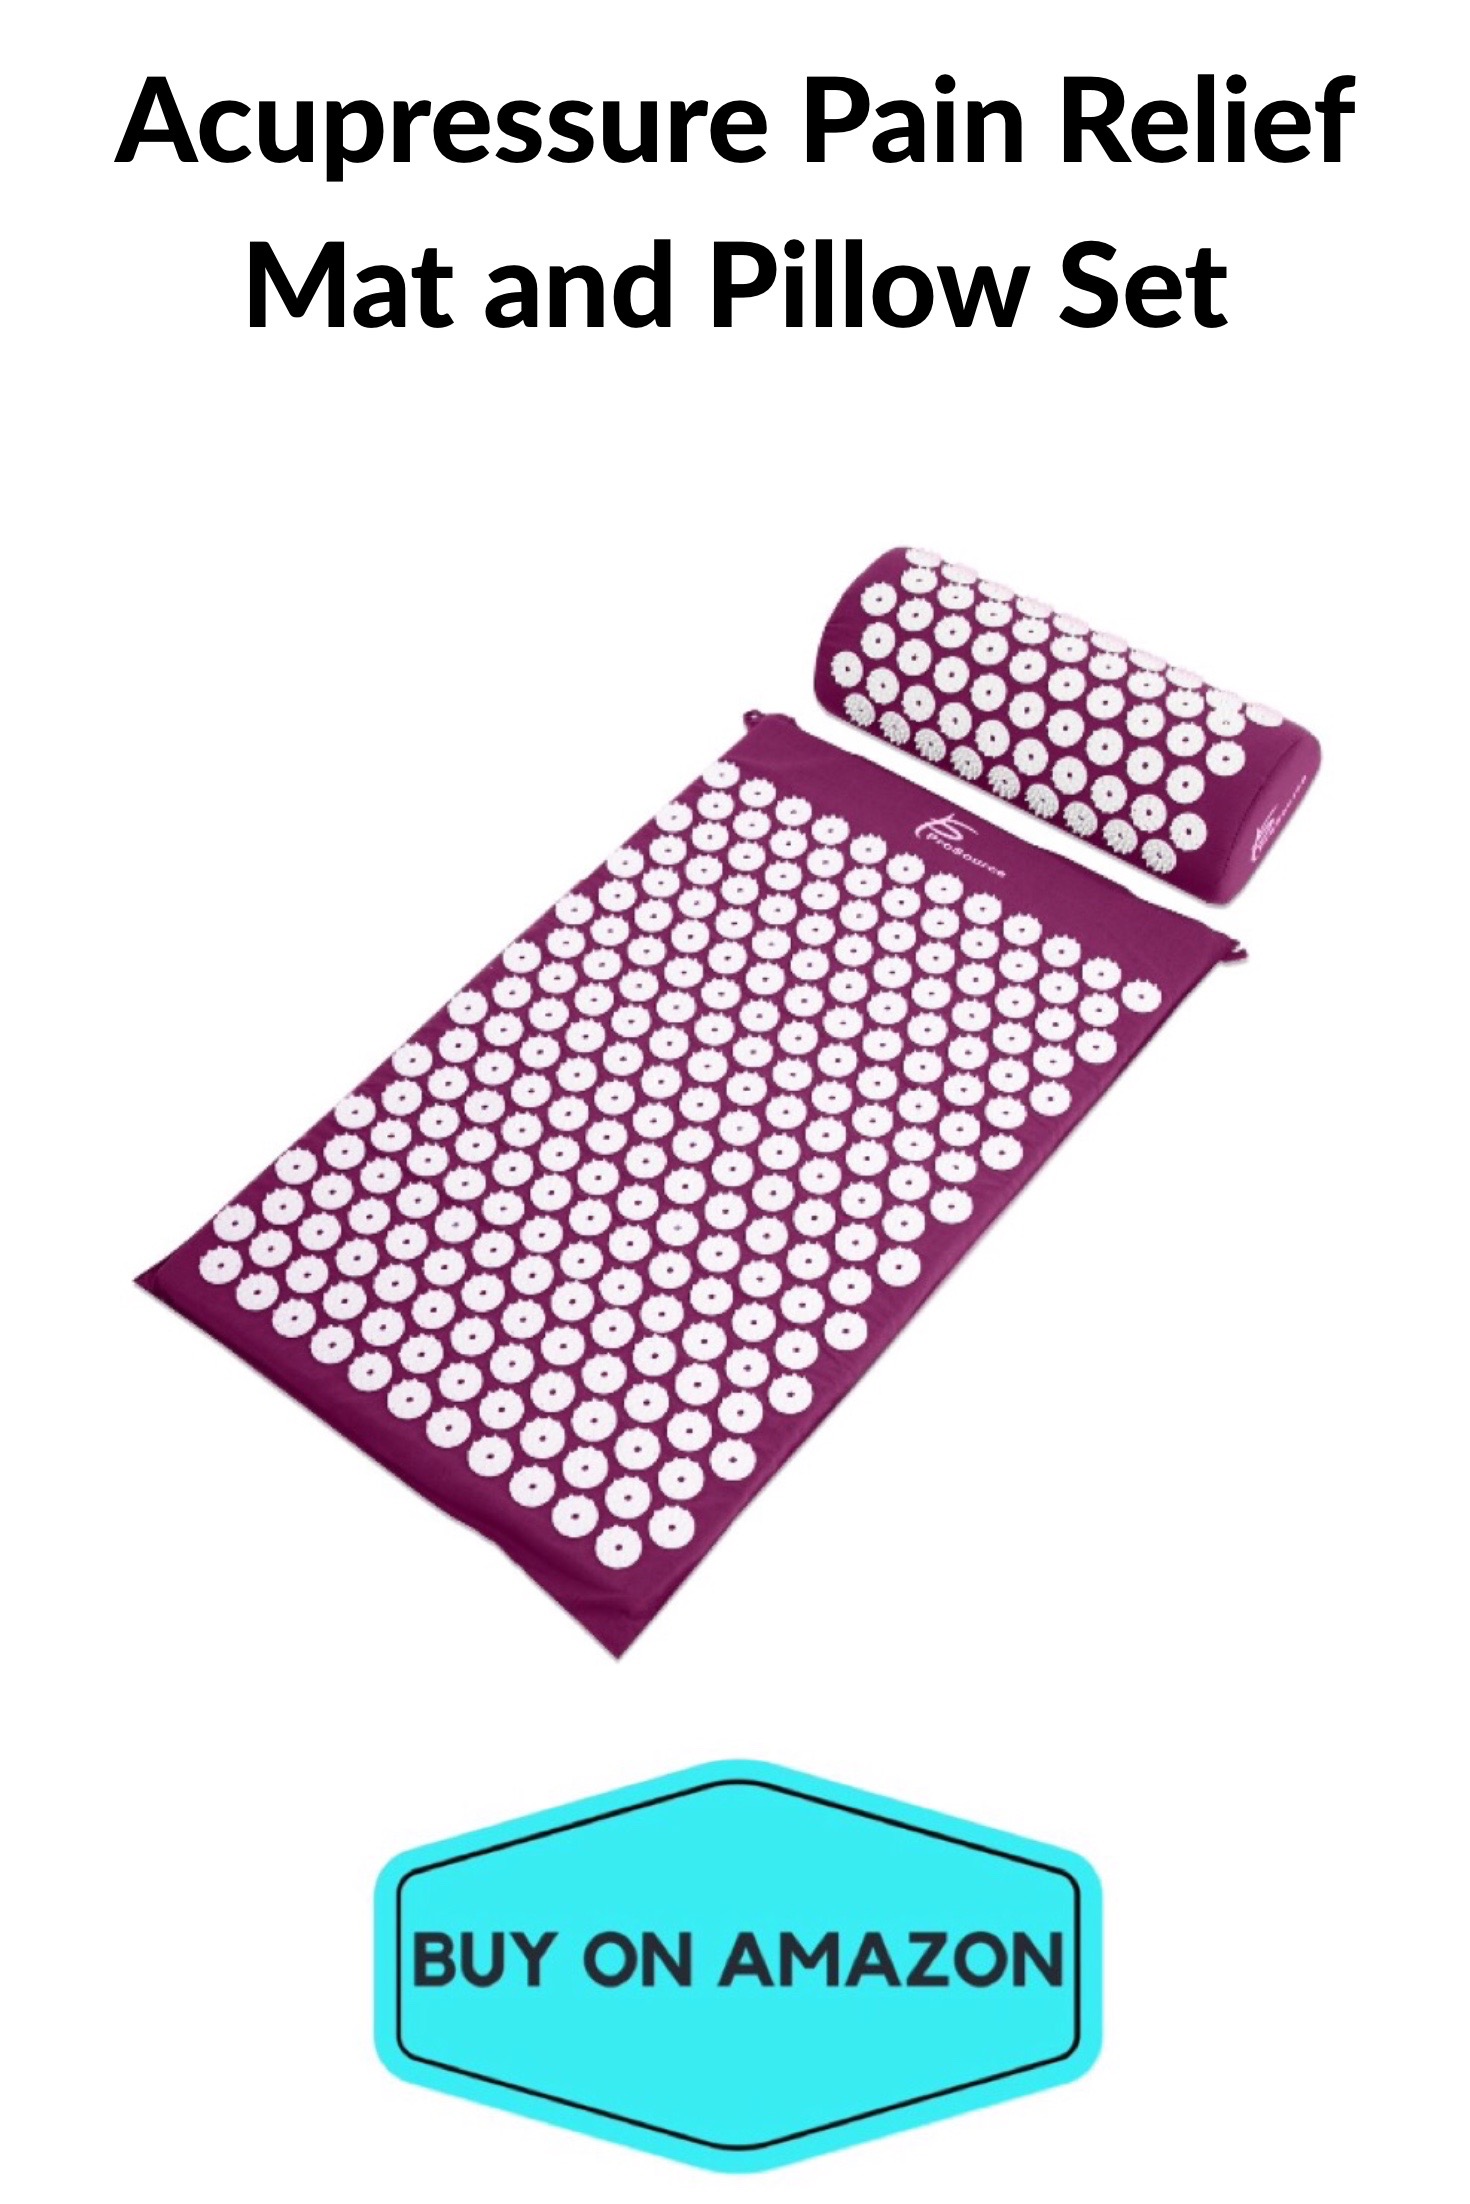 Acupressure Pain Relief Mat and Pillow Set